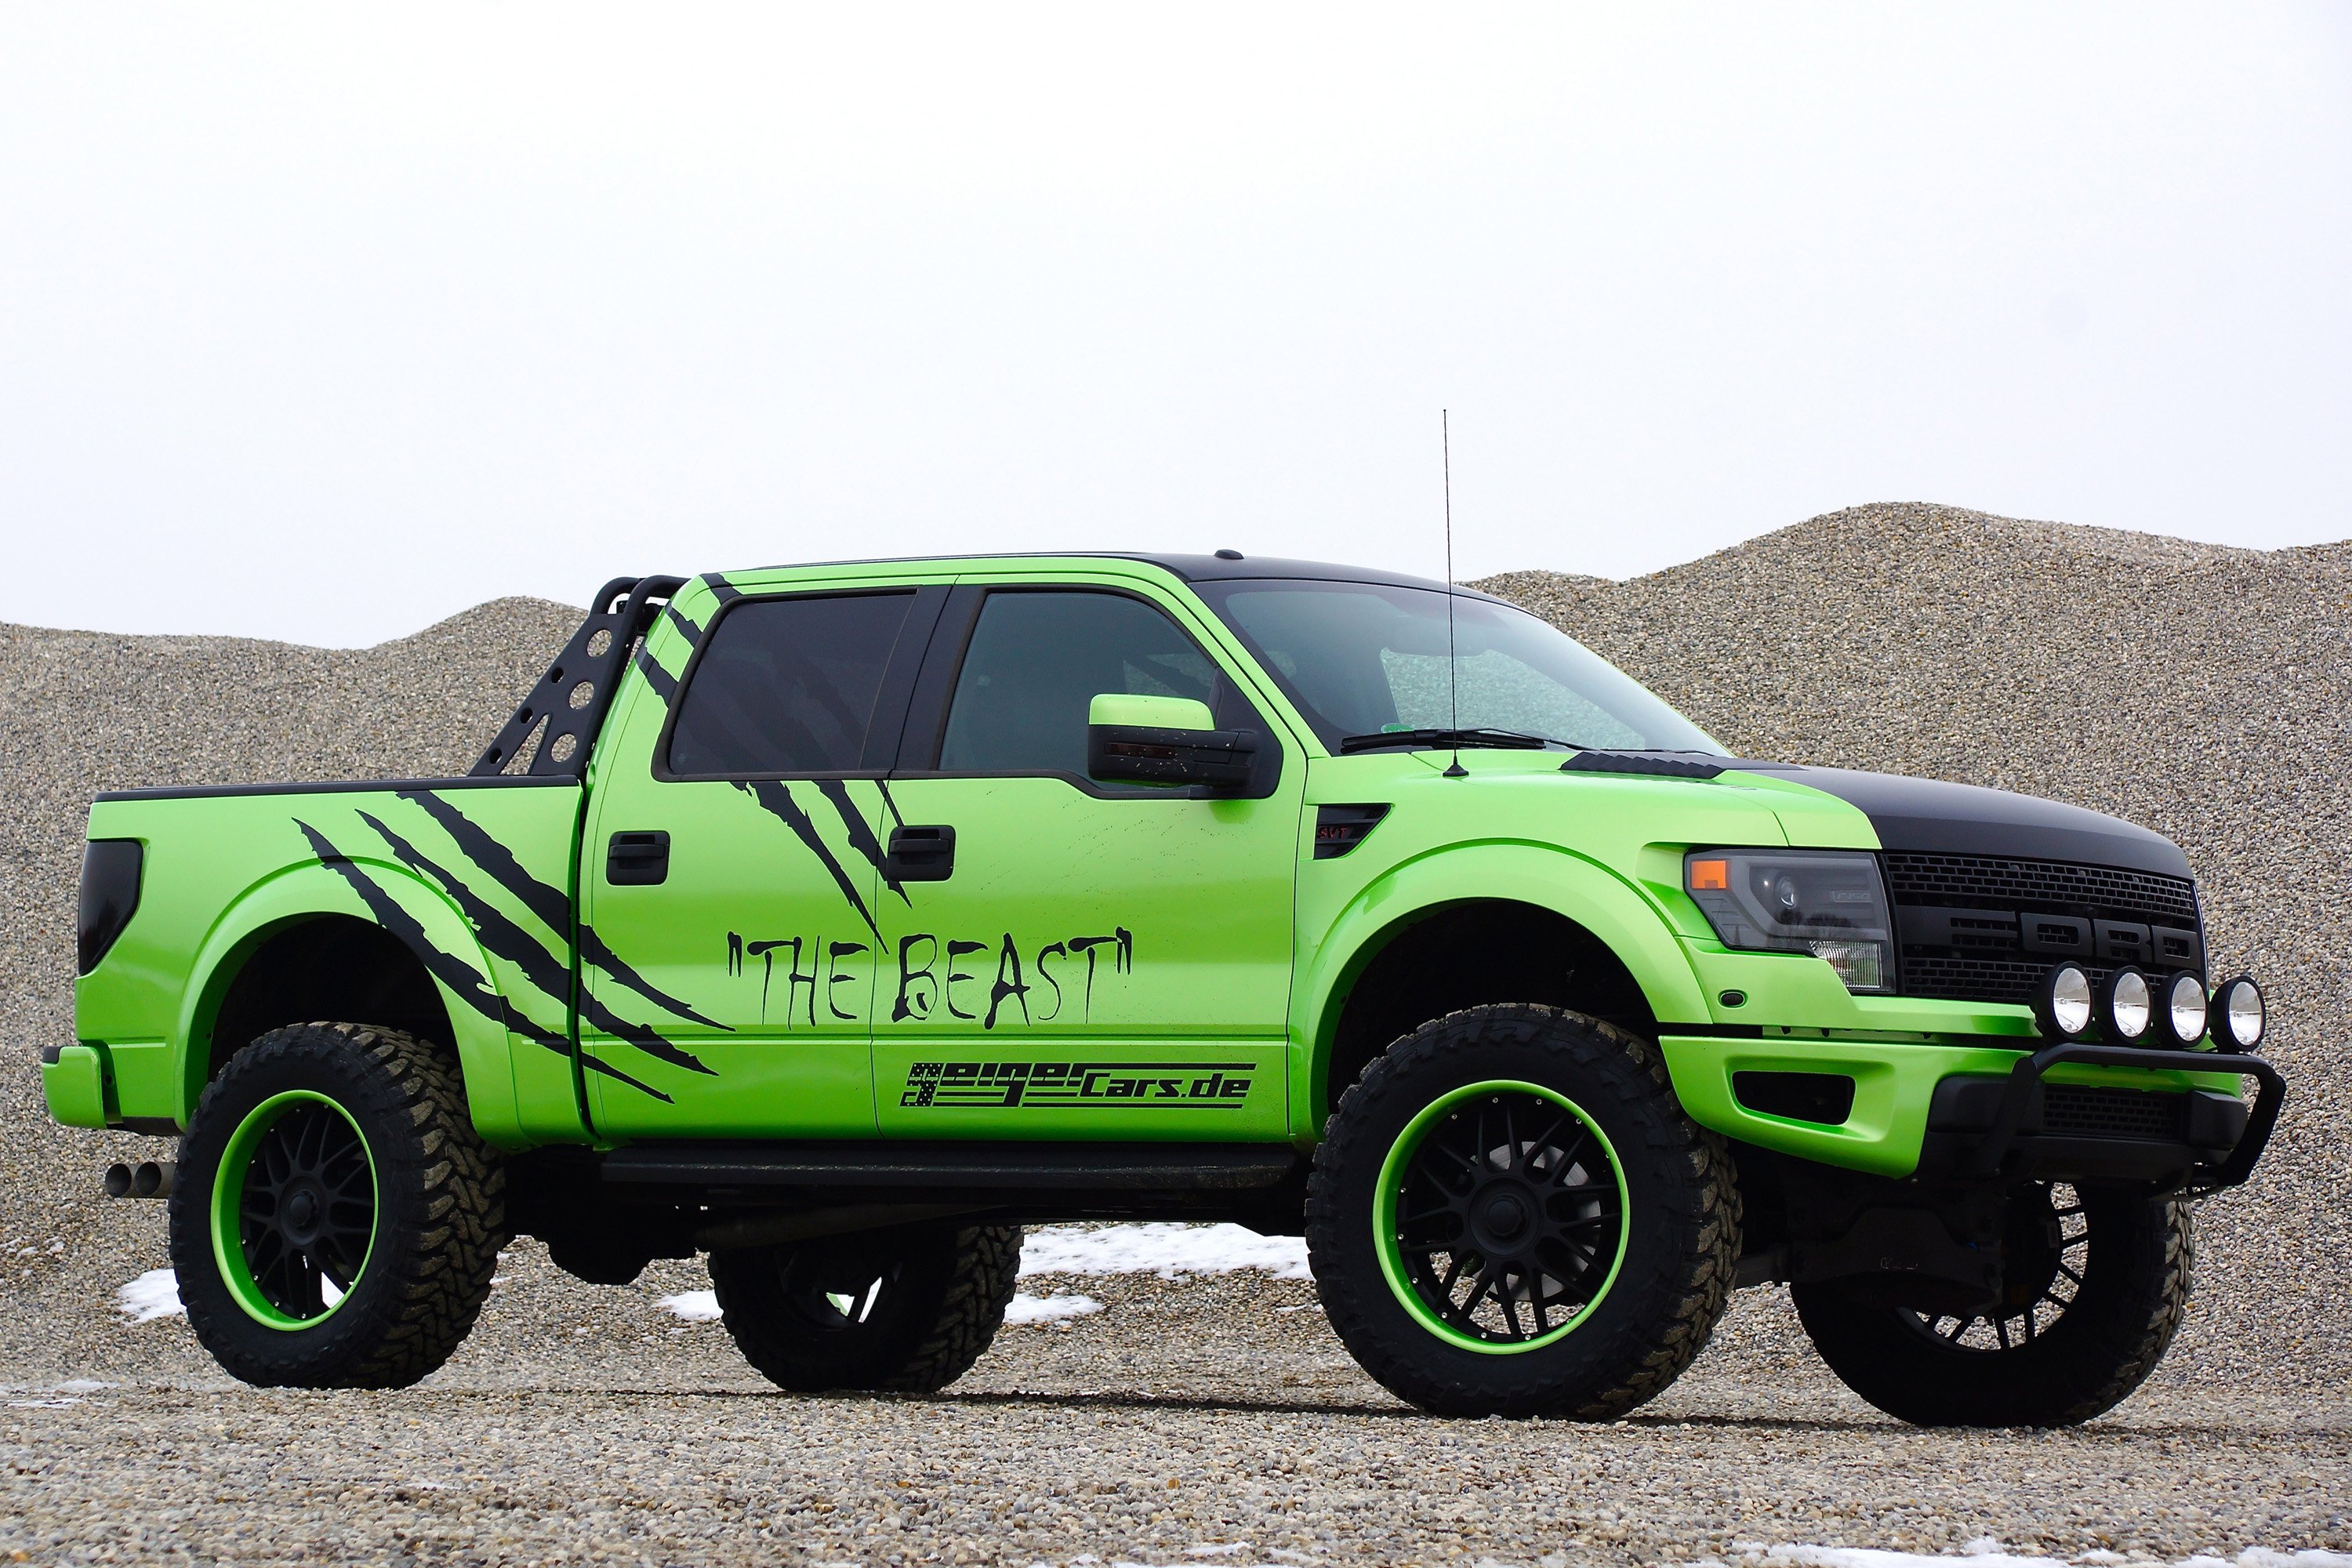 2014, Geiger, Ford, F 150, Svt, Raptor, Supercrew, Beast, Pickup, 4x4, Tuning, Muscle Wallpaper